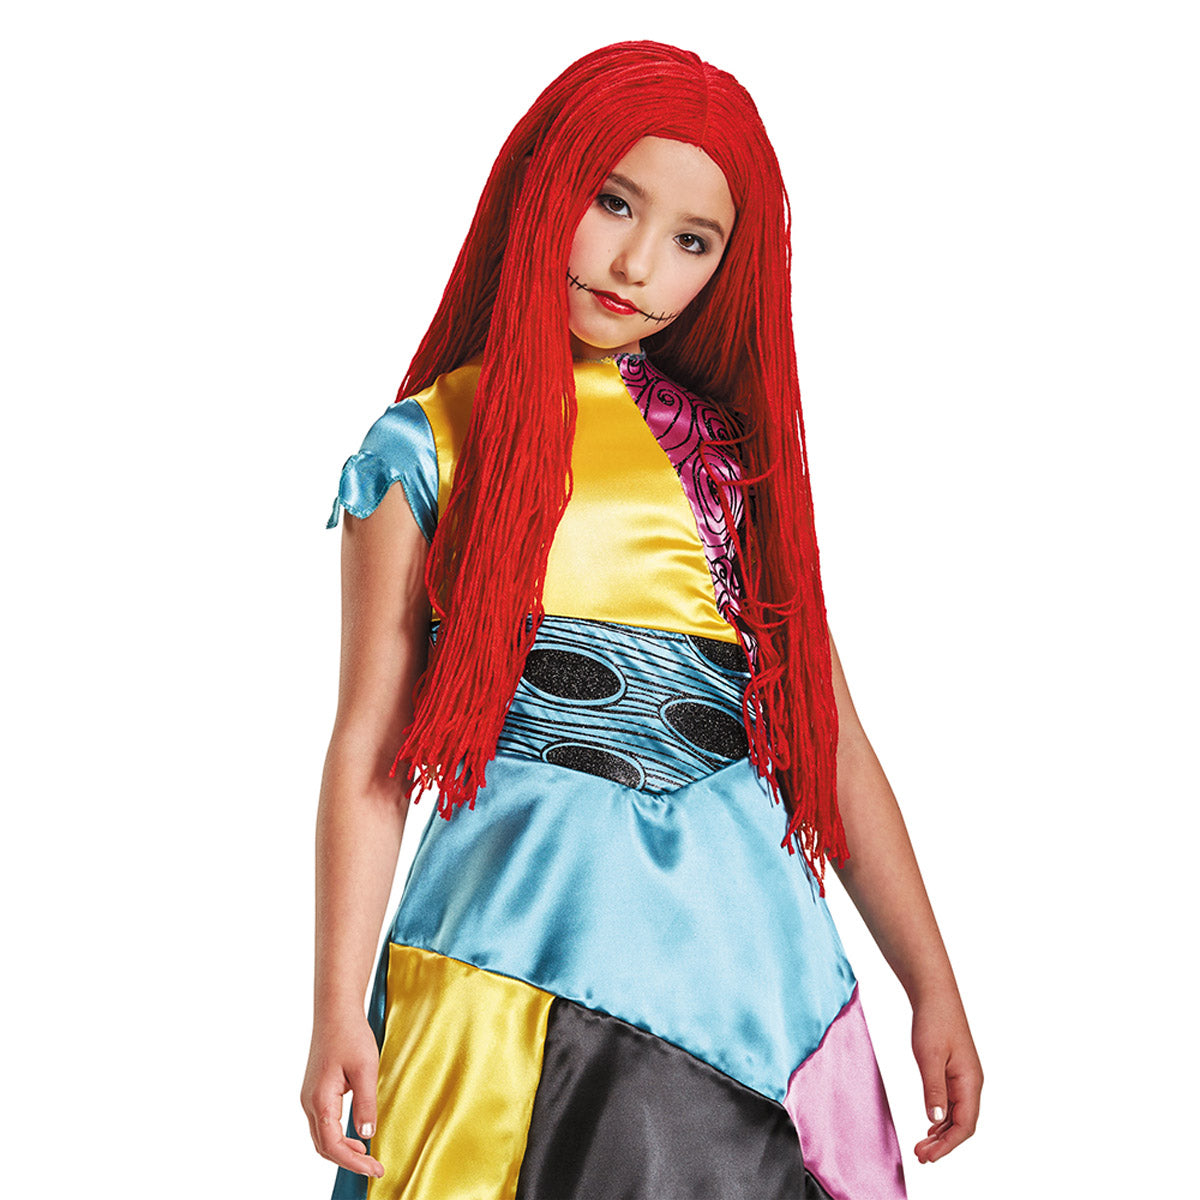 Sally Child Wig Disguise 21595